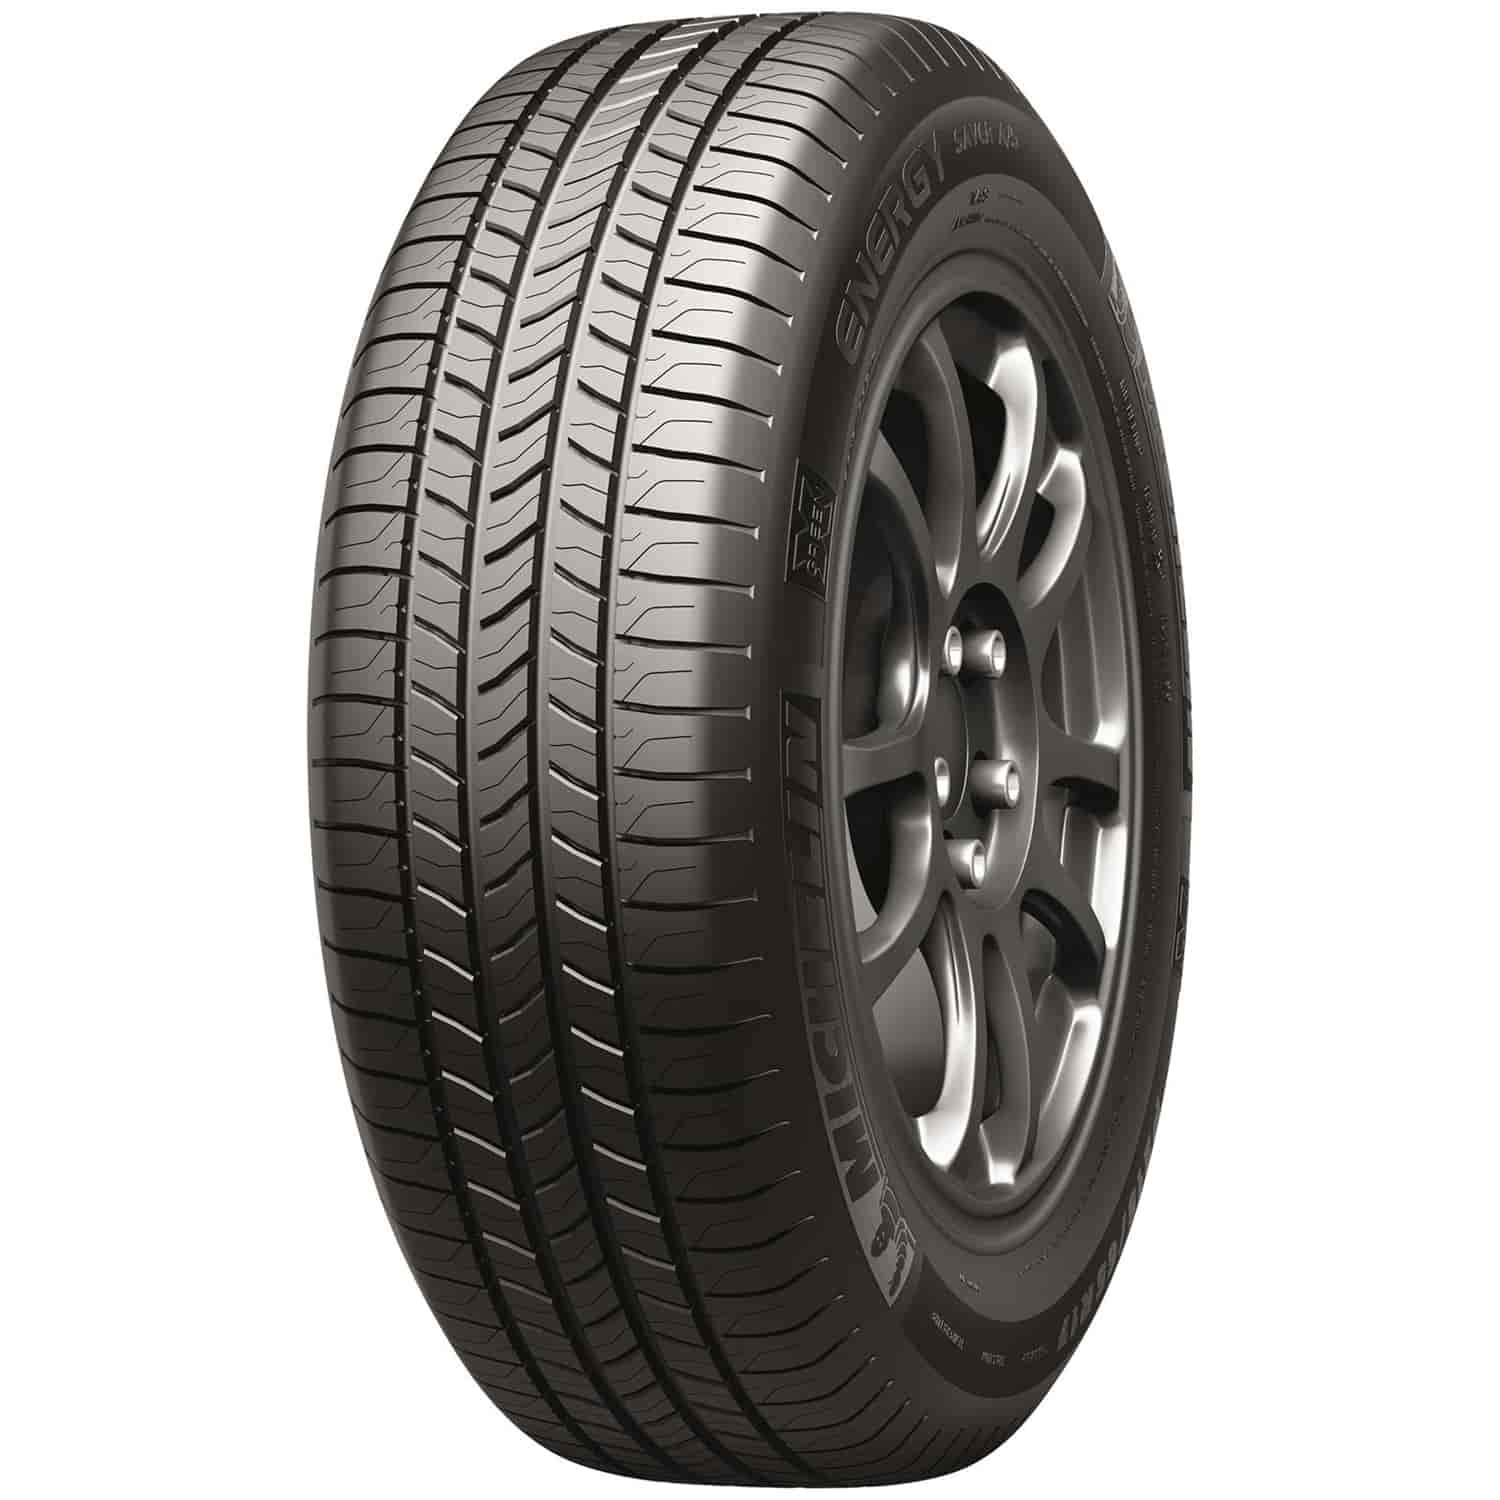 Energy Saver A/S P235/50R17 95T BSW